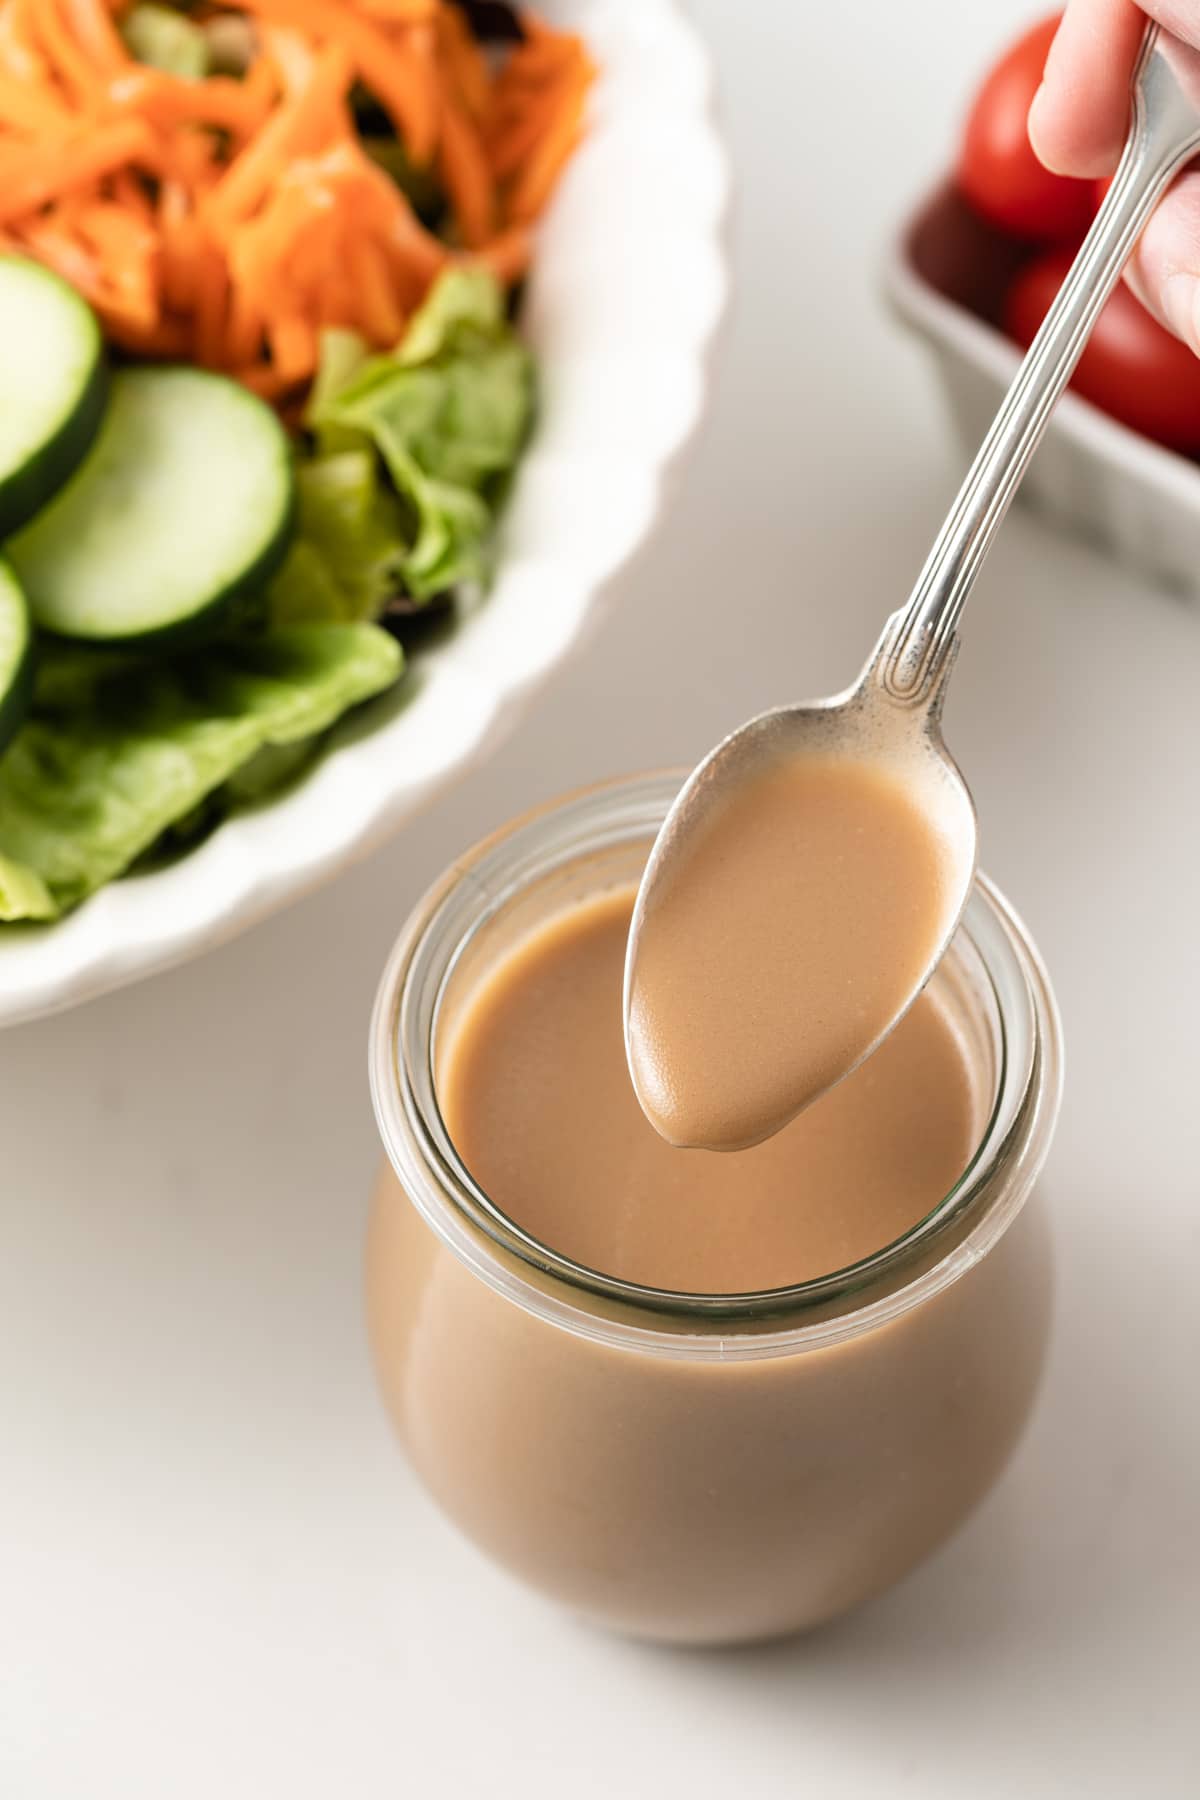 Balsamic dressing on a spoon.